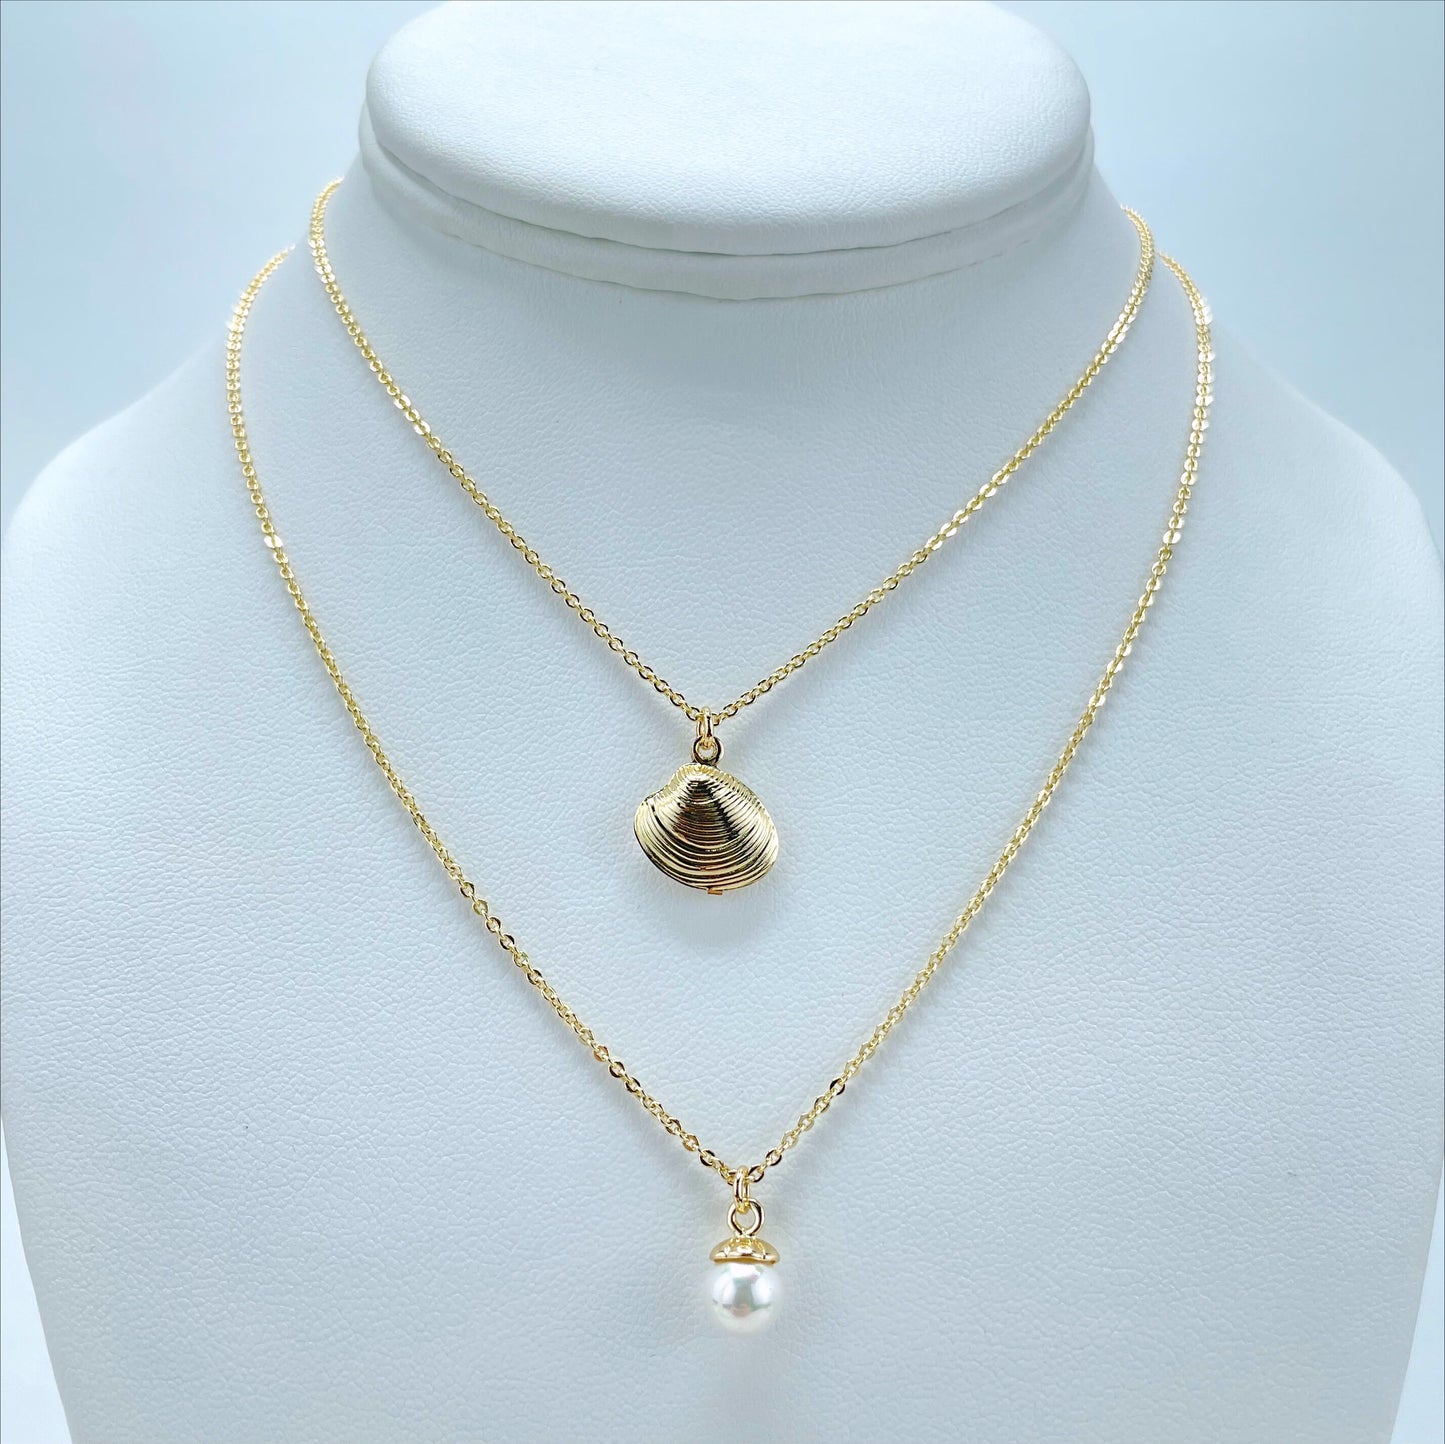 18k Gold Filled Double 2mm Rolo Link Necklaces with Gold Shell & Simulated Pearl, 02 Necklace Wholesale Jewelry Making Supplies